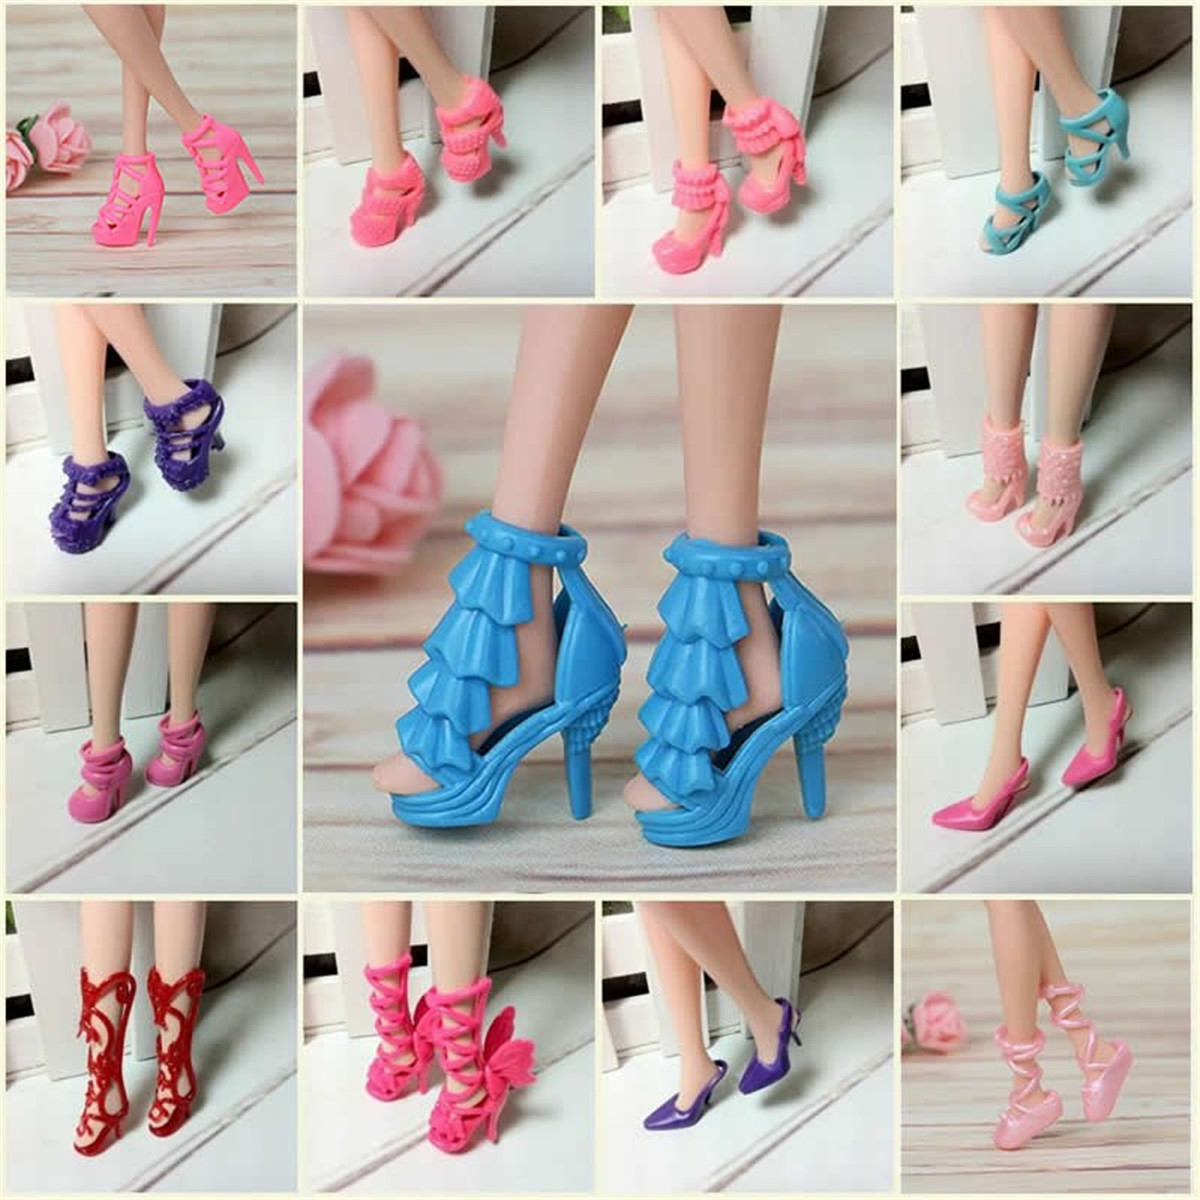 Set of 40 Pairs Fashion Dolls Shoes Heels Sandals For Dolls Outfit Dress